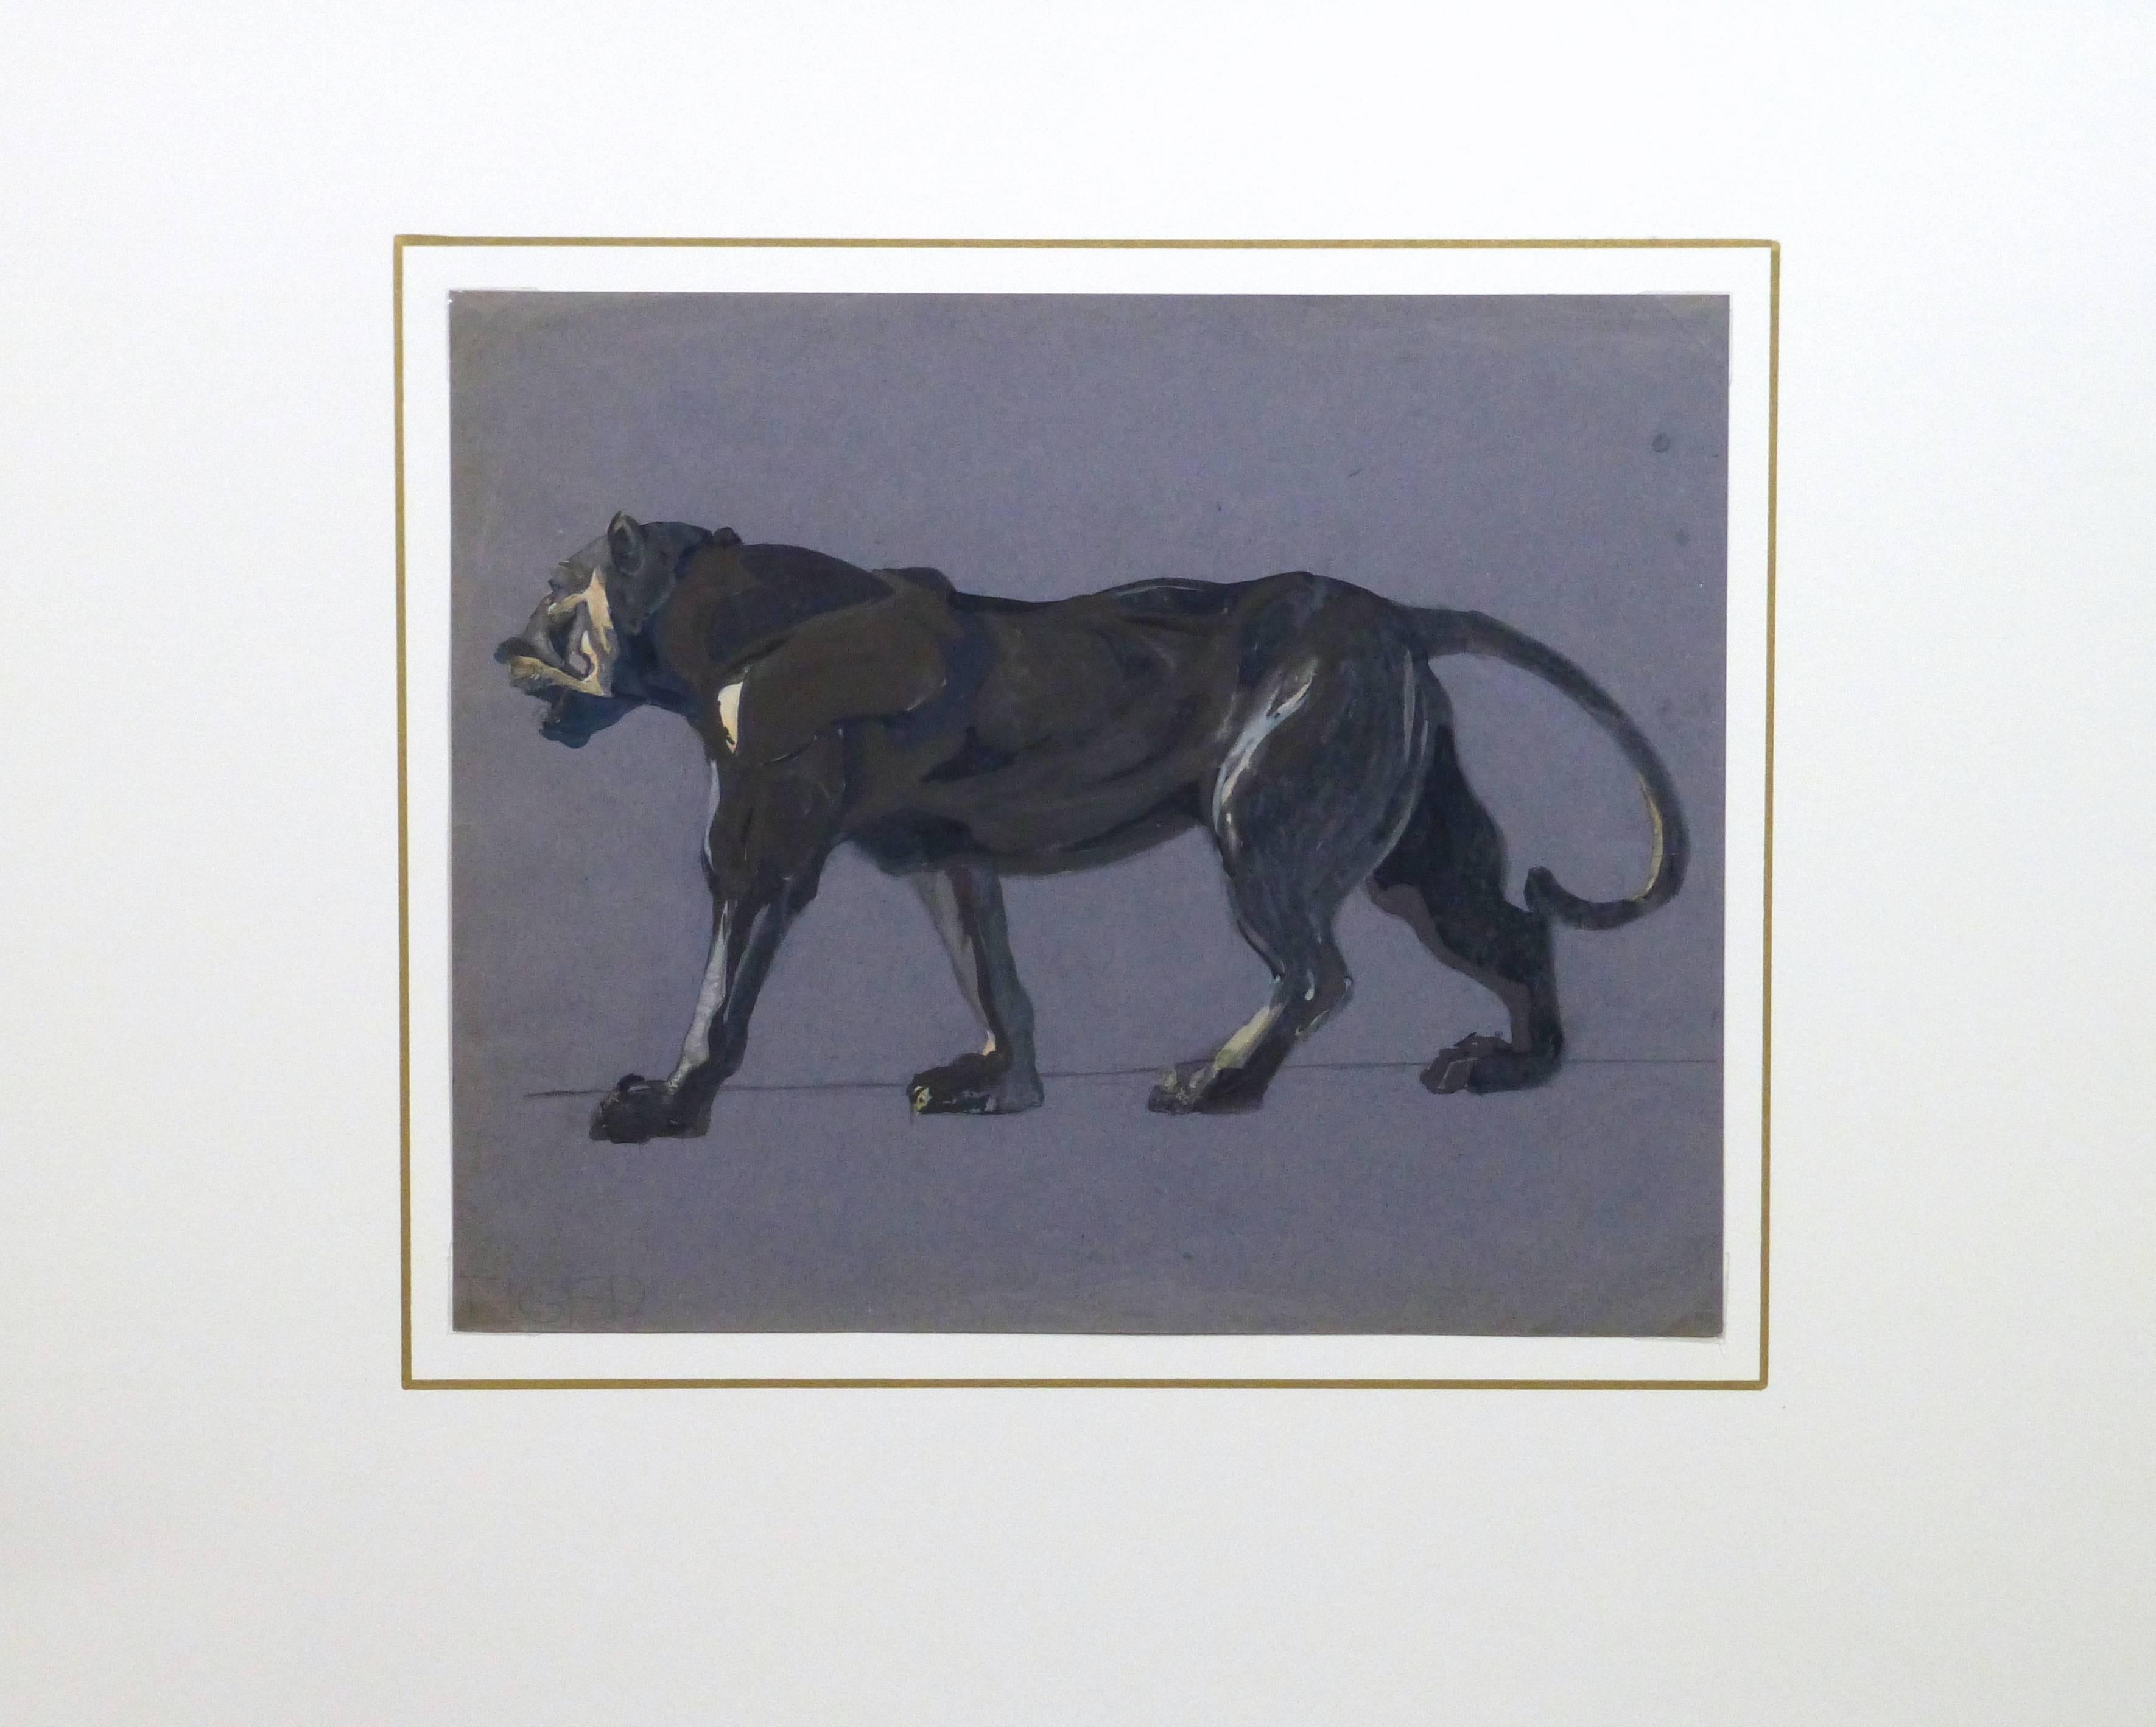 Handsome tempera painting on blue paper of a muscular great cat in the shadows by Frey, circa 1920.

Original artwork on paper displayed on a white mat with a gold border. Archival plastic sleeve and Certificate of Authenticity included. Artwork,